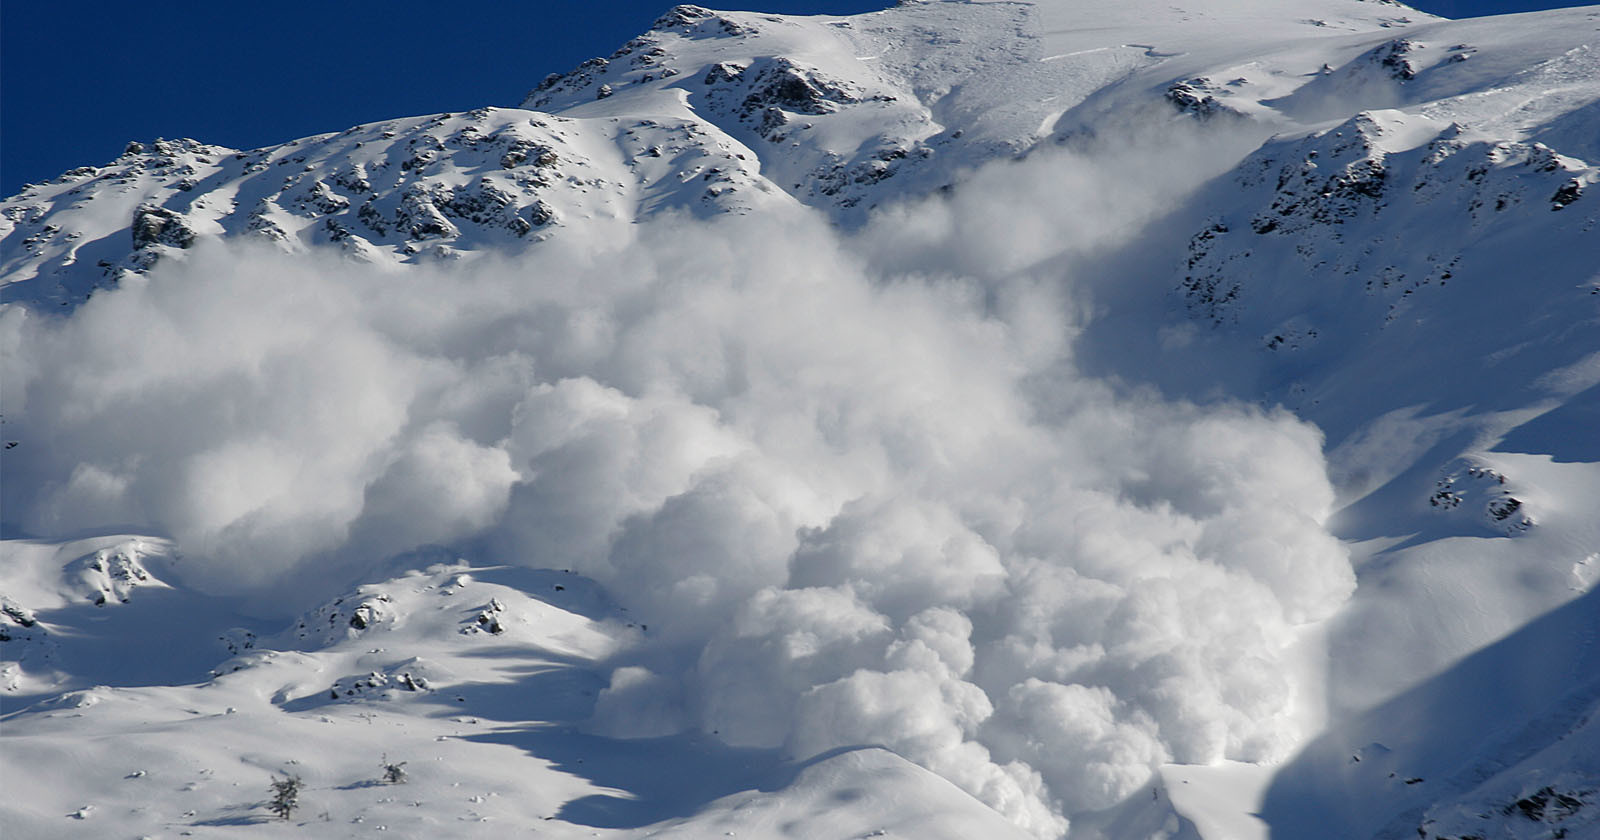  terrifying footage shows avalanche hurtling toward photographer 